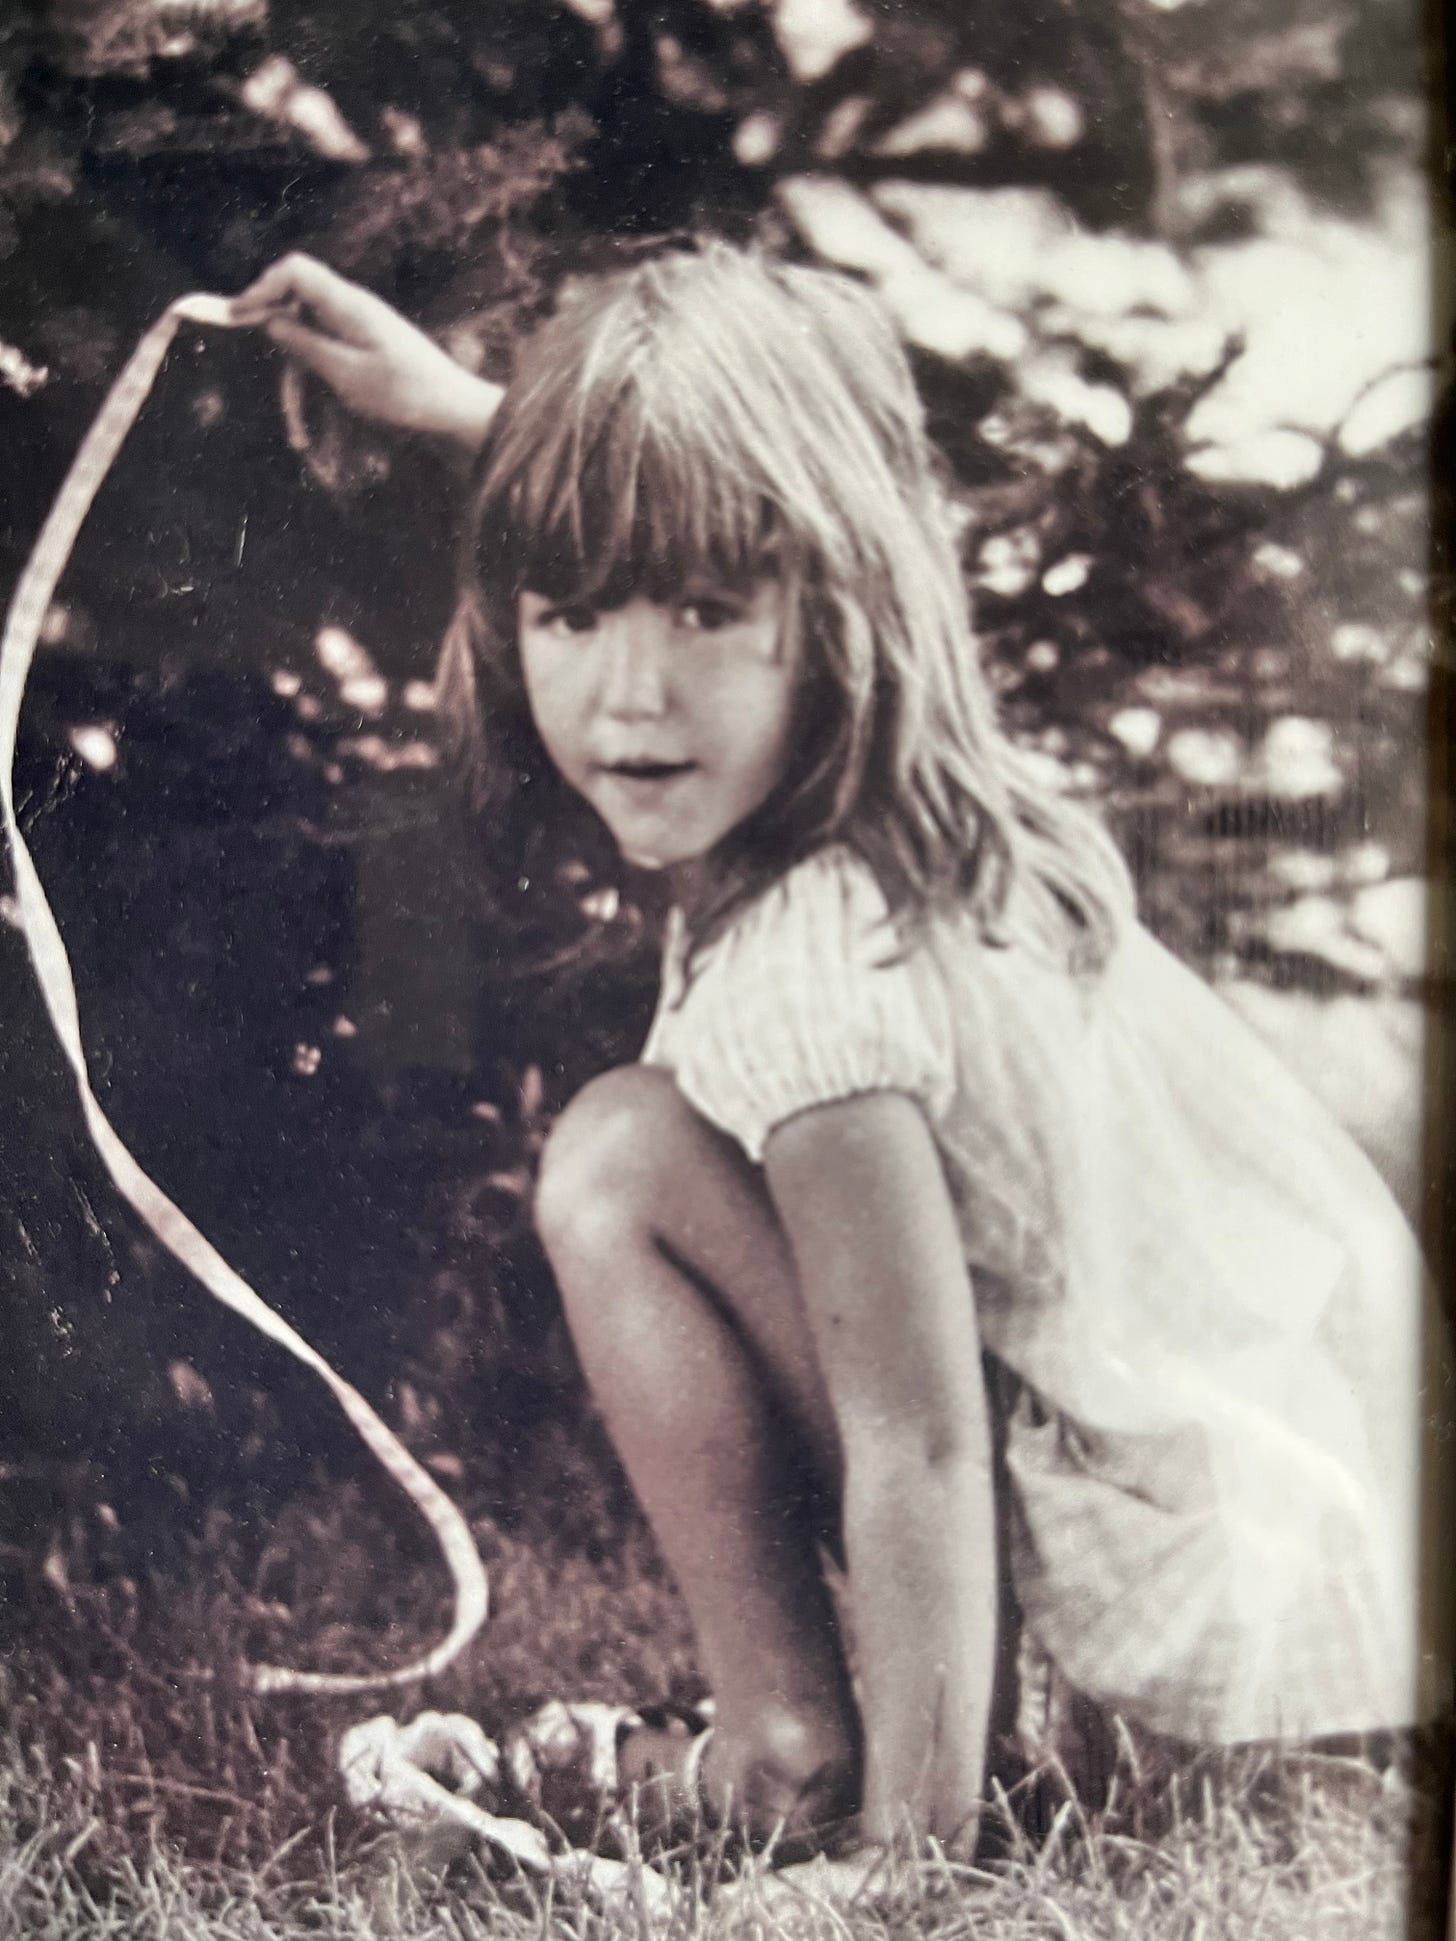 A black and white photograph of Tracy Livecchi as a child, crouching in the grass and wearing a dress.